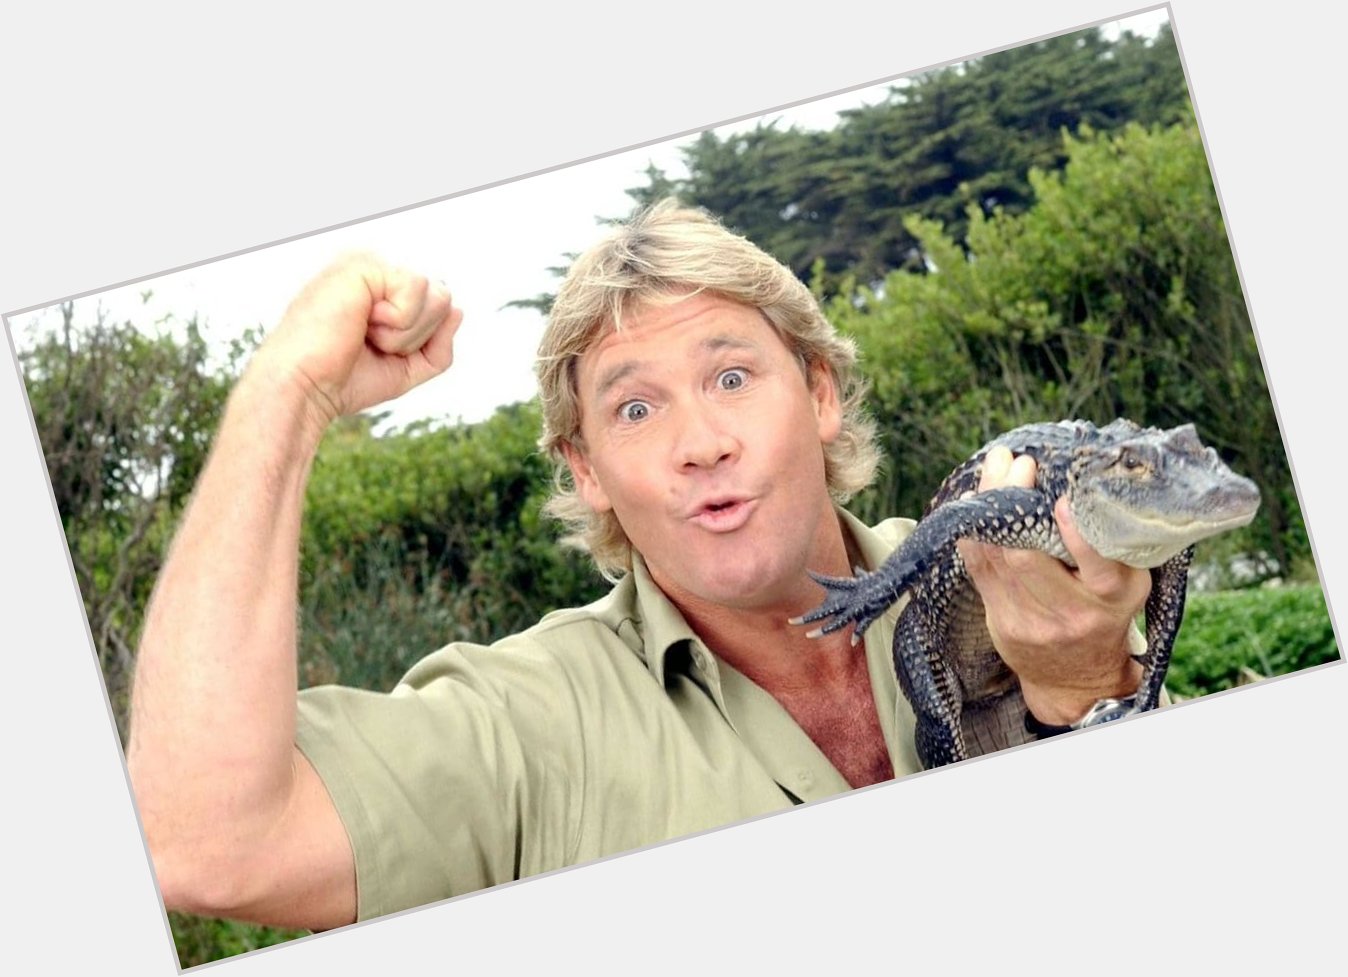 Happy birthday to Steve Irwin. He would have turned 57 years old today 